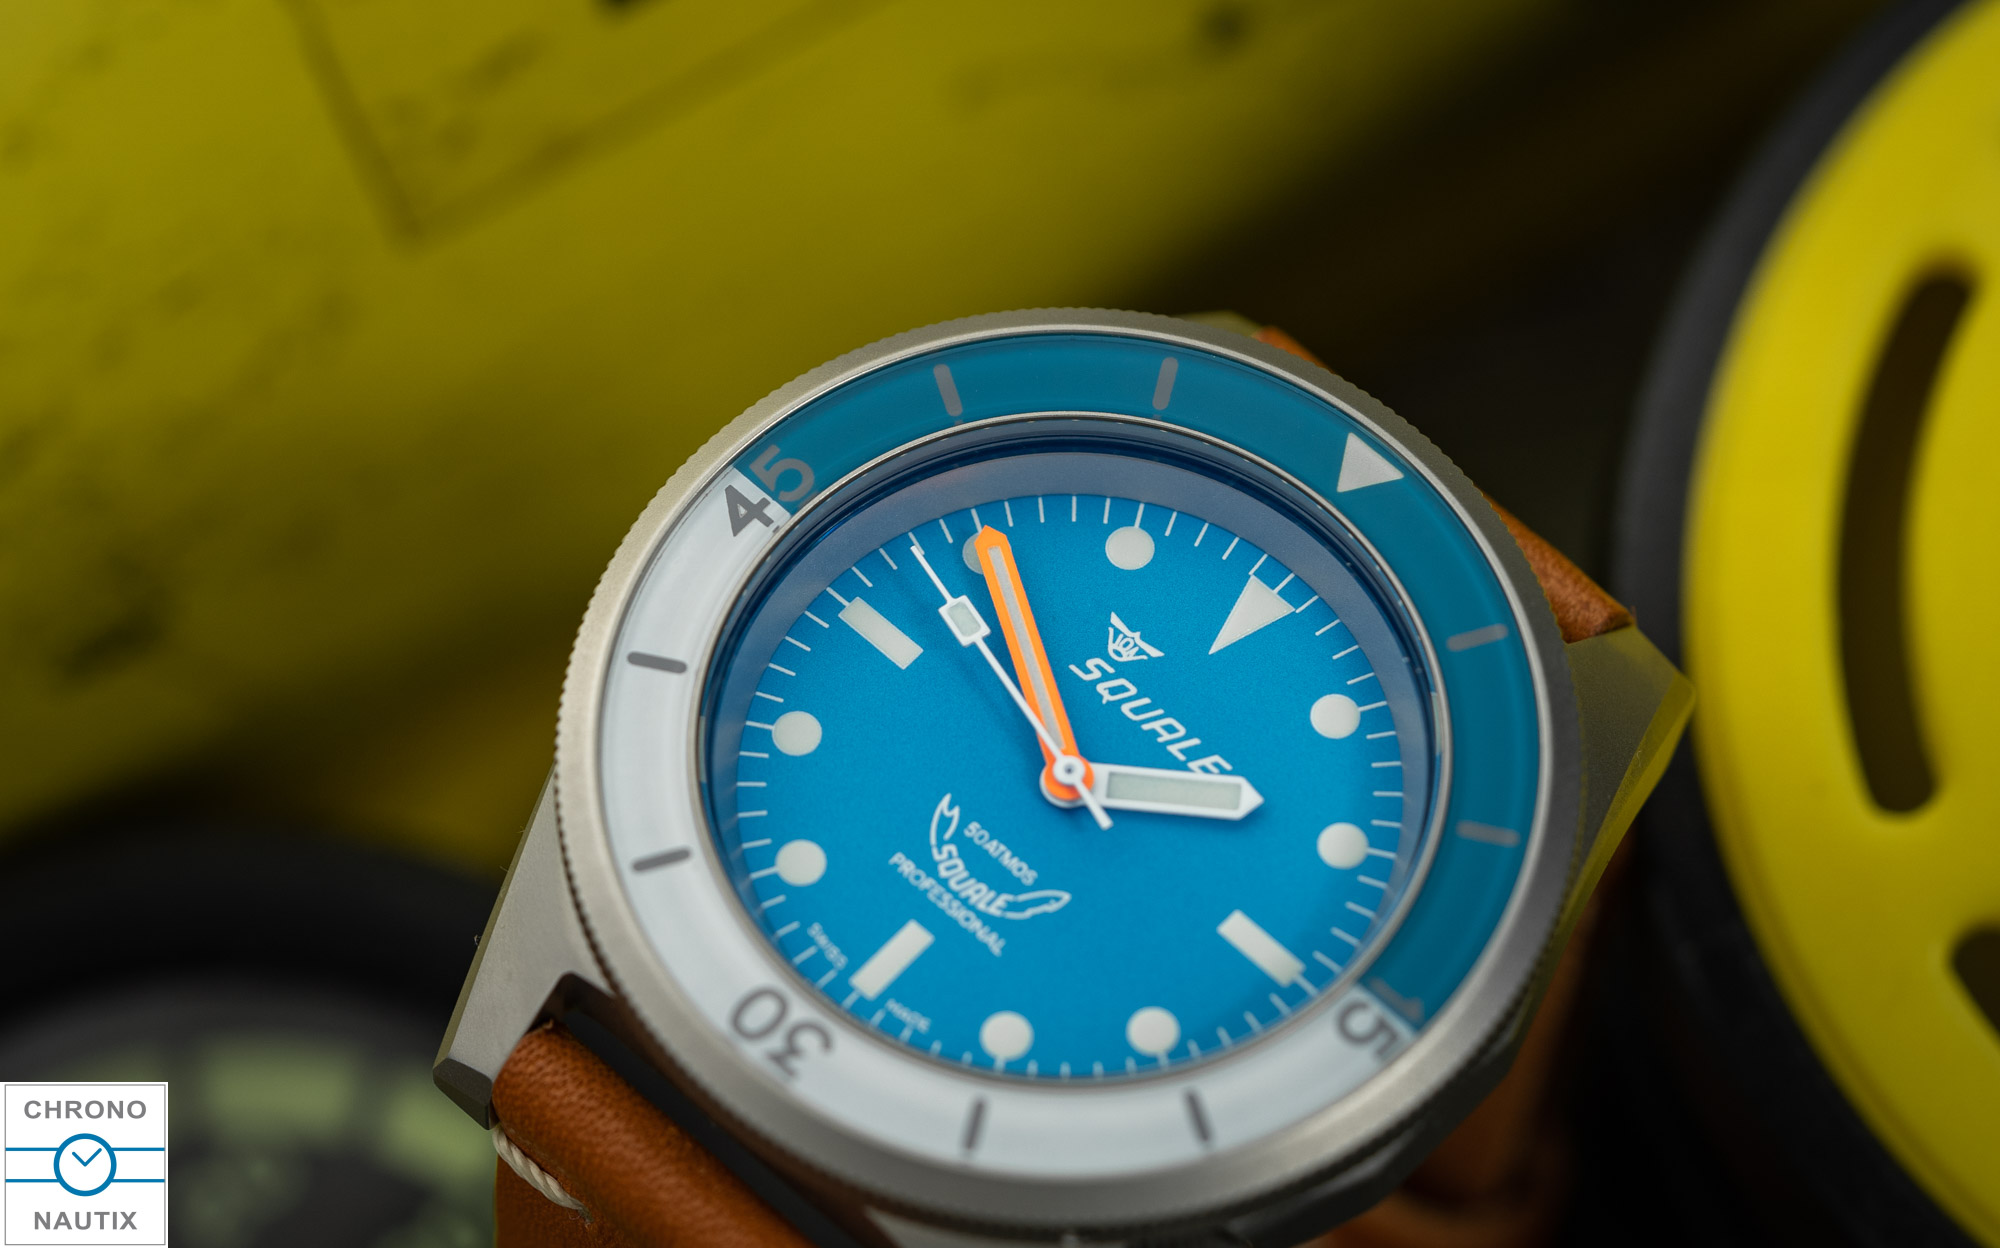 Squale x Chronofactum 1521 Squalo Bianco Special Edition Blasted Case Test 12